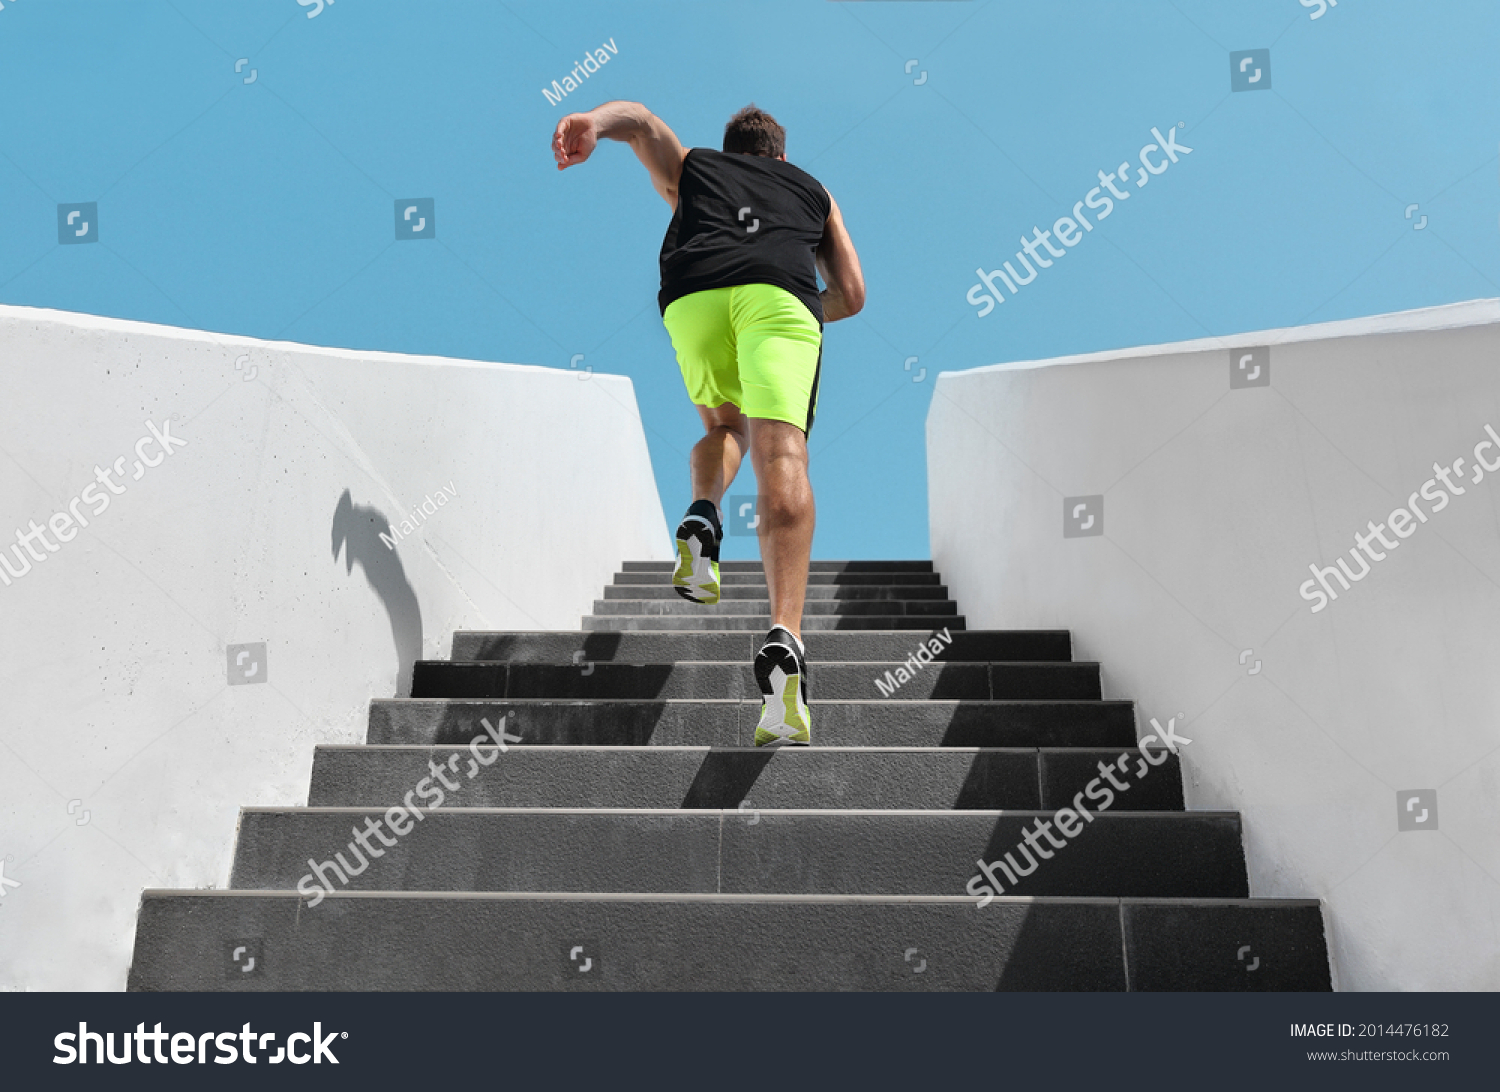 Stairs exercise fitess man running fast up the staircase for hiit cardio workout run at outdoor gym. Sport active athlete lifestyle training legs muscles. #2014476182